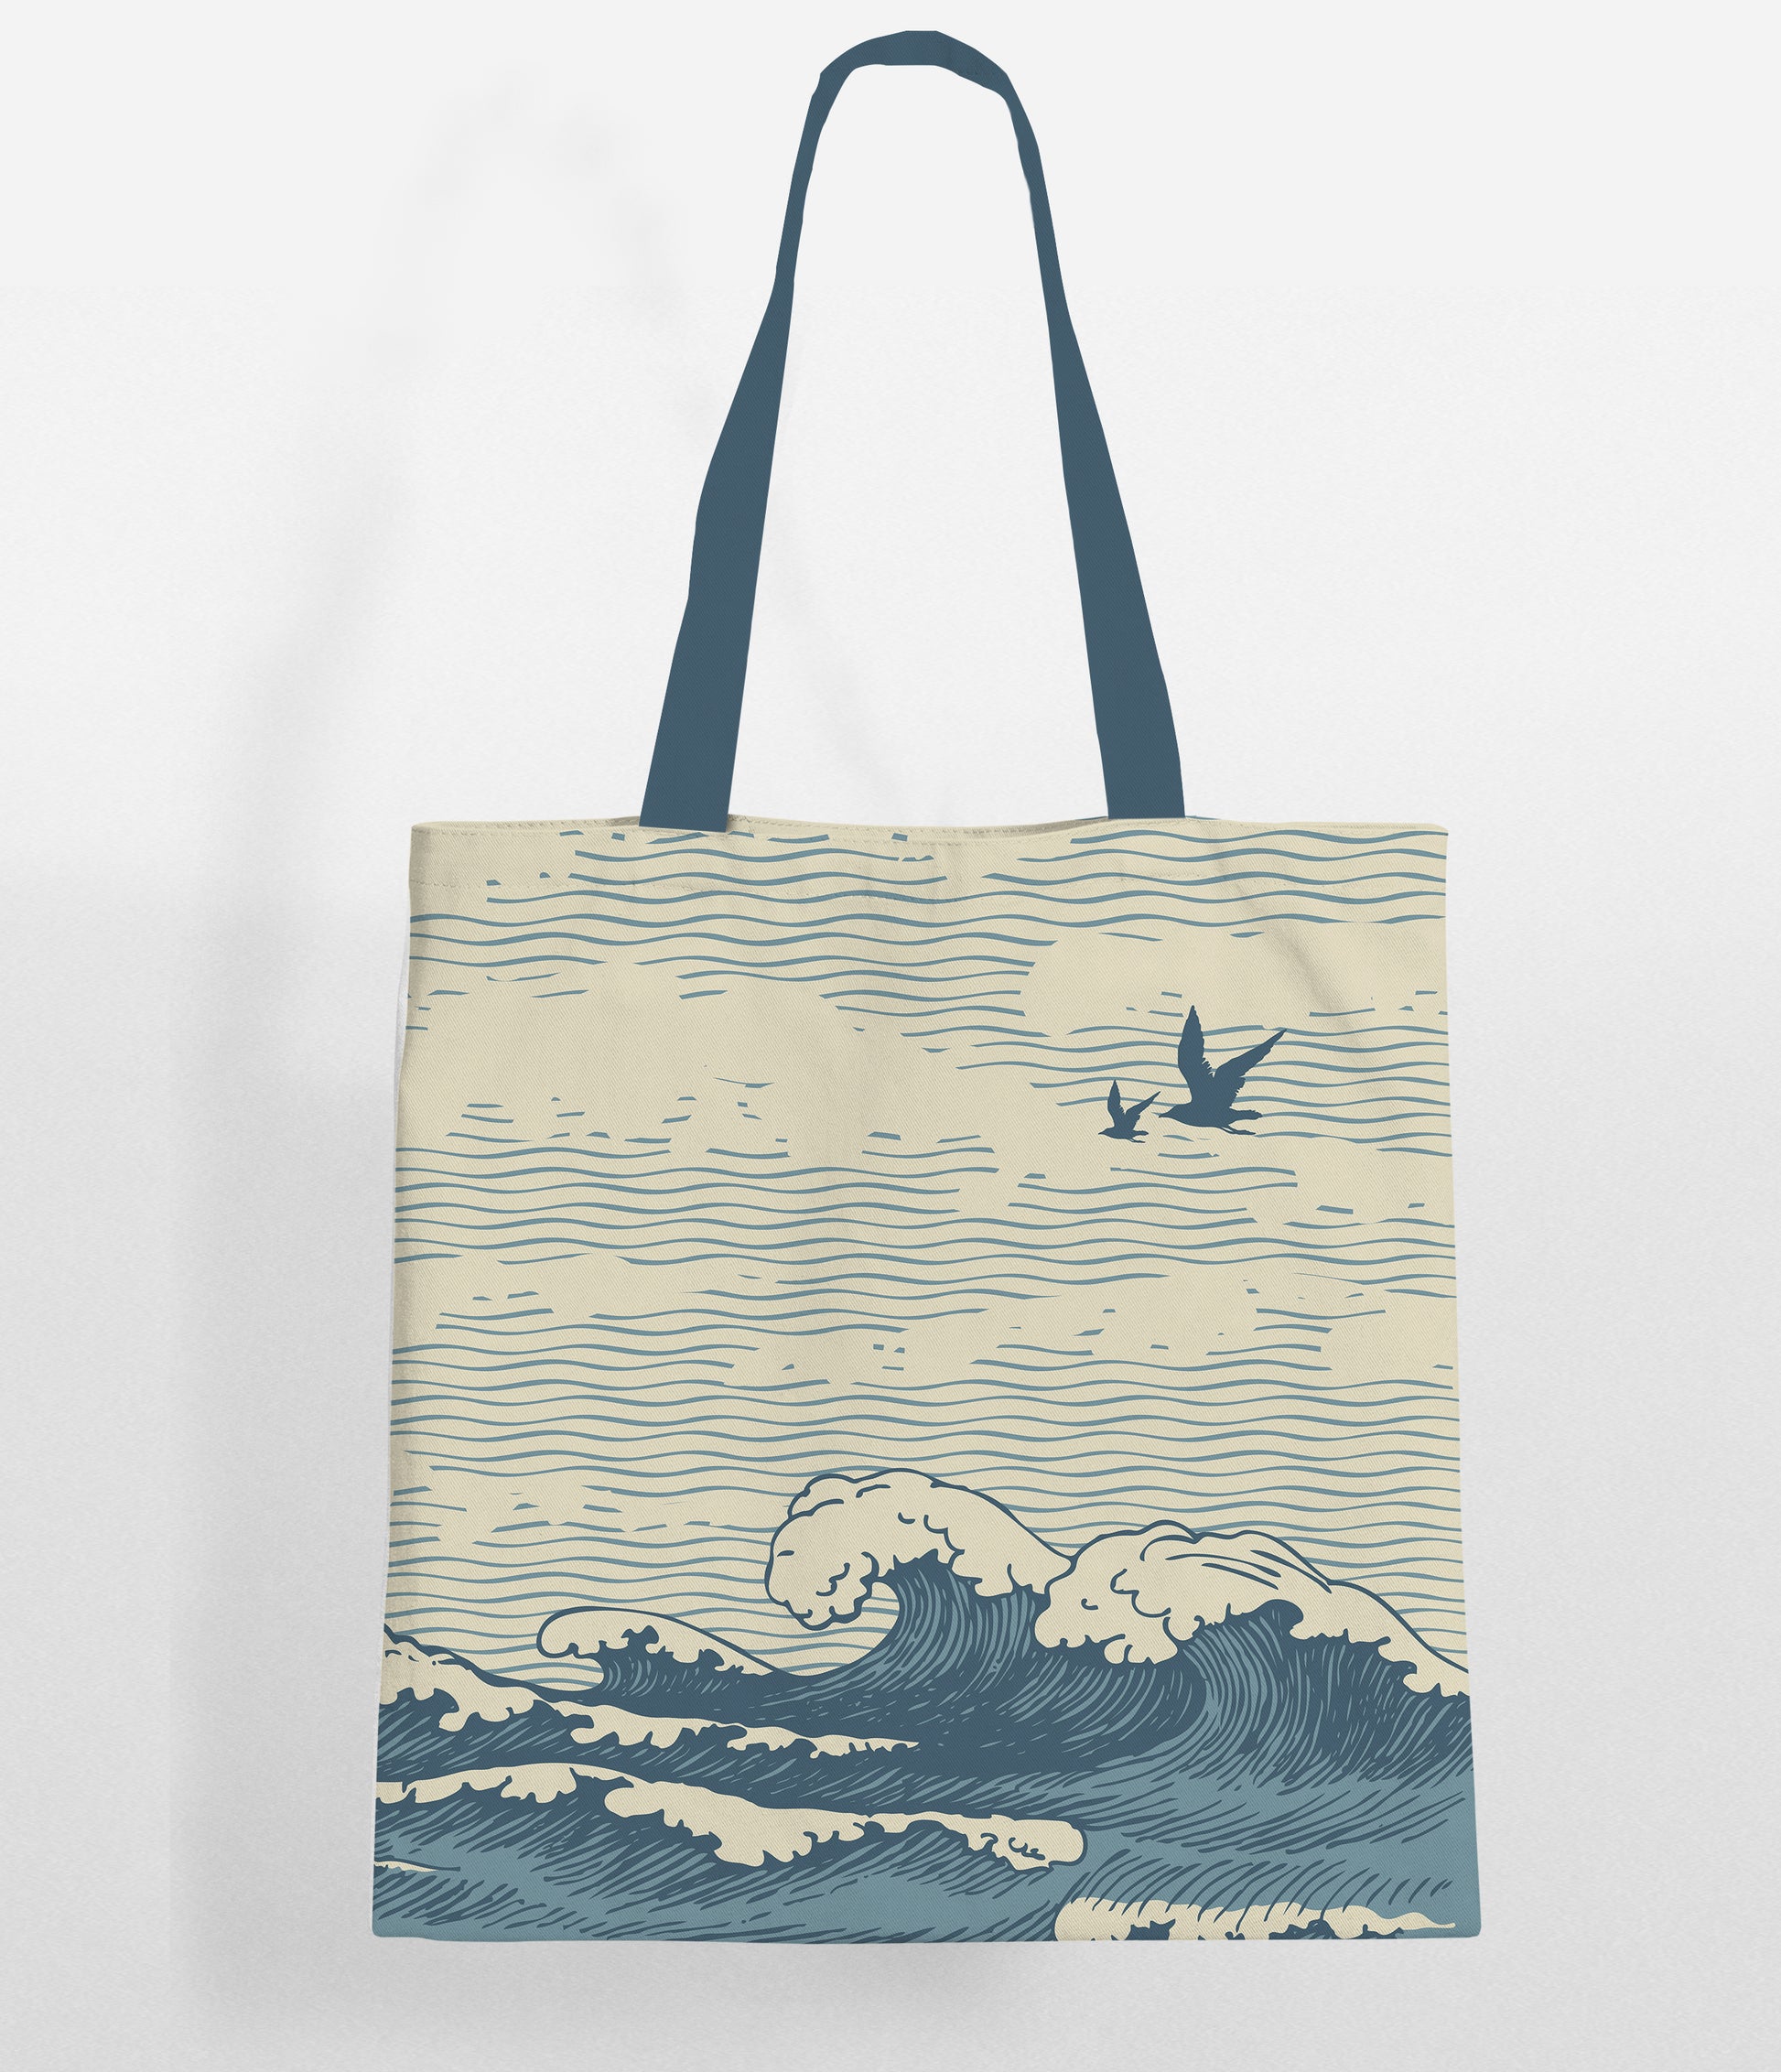 A beige tote bag with dark blue handles and a printed design featuring wavy lines representing the ocean, with two seagulls flying above the waves.